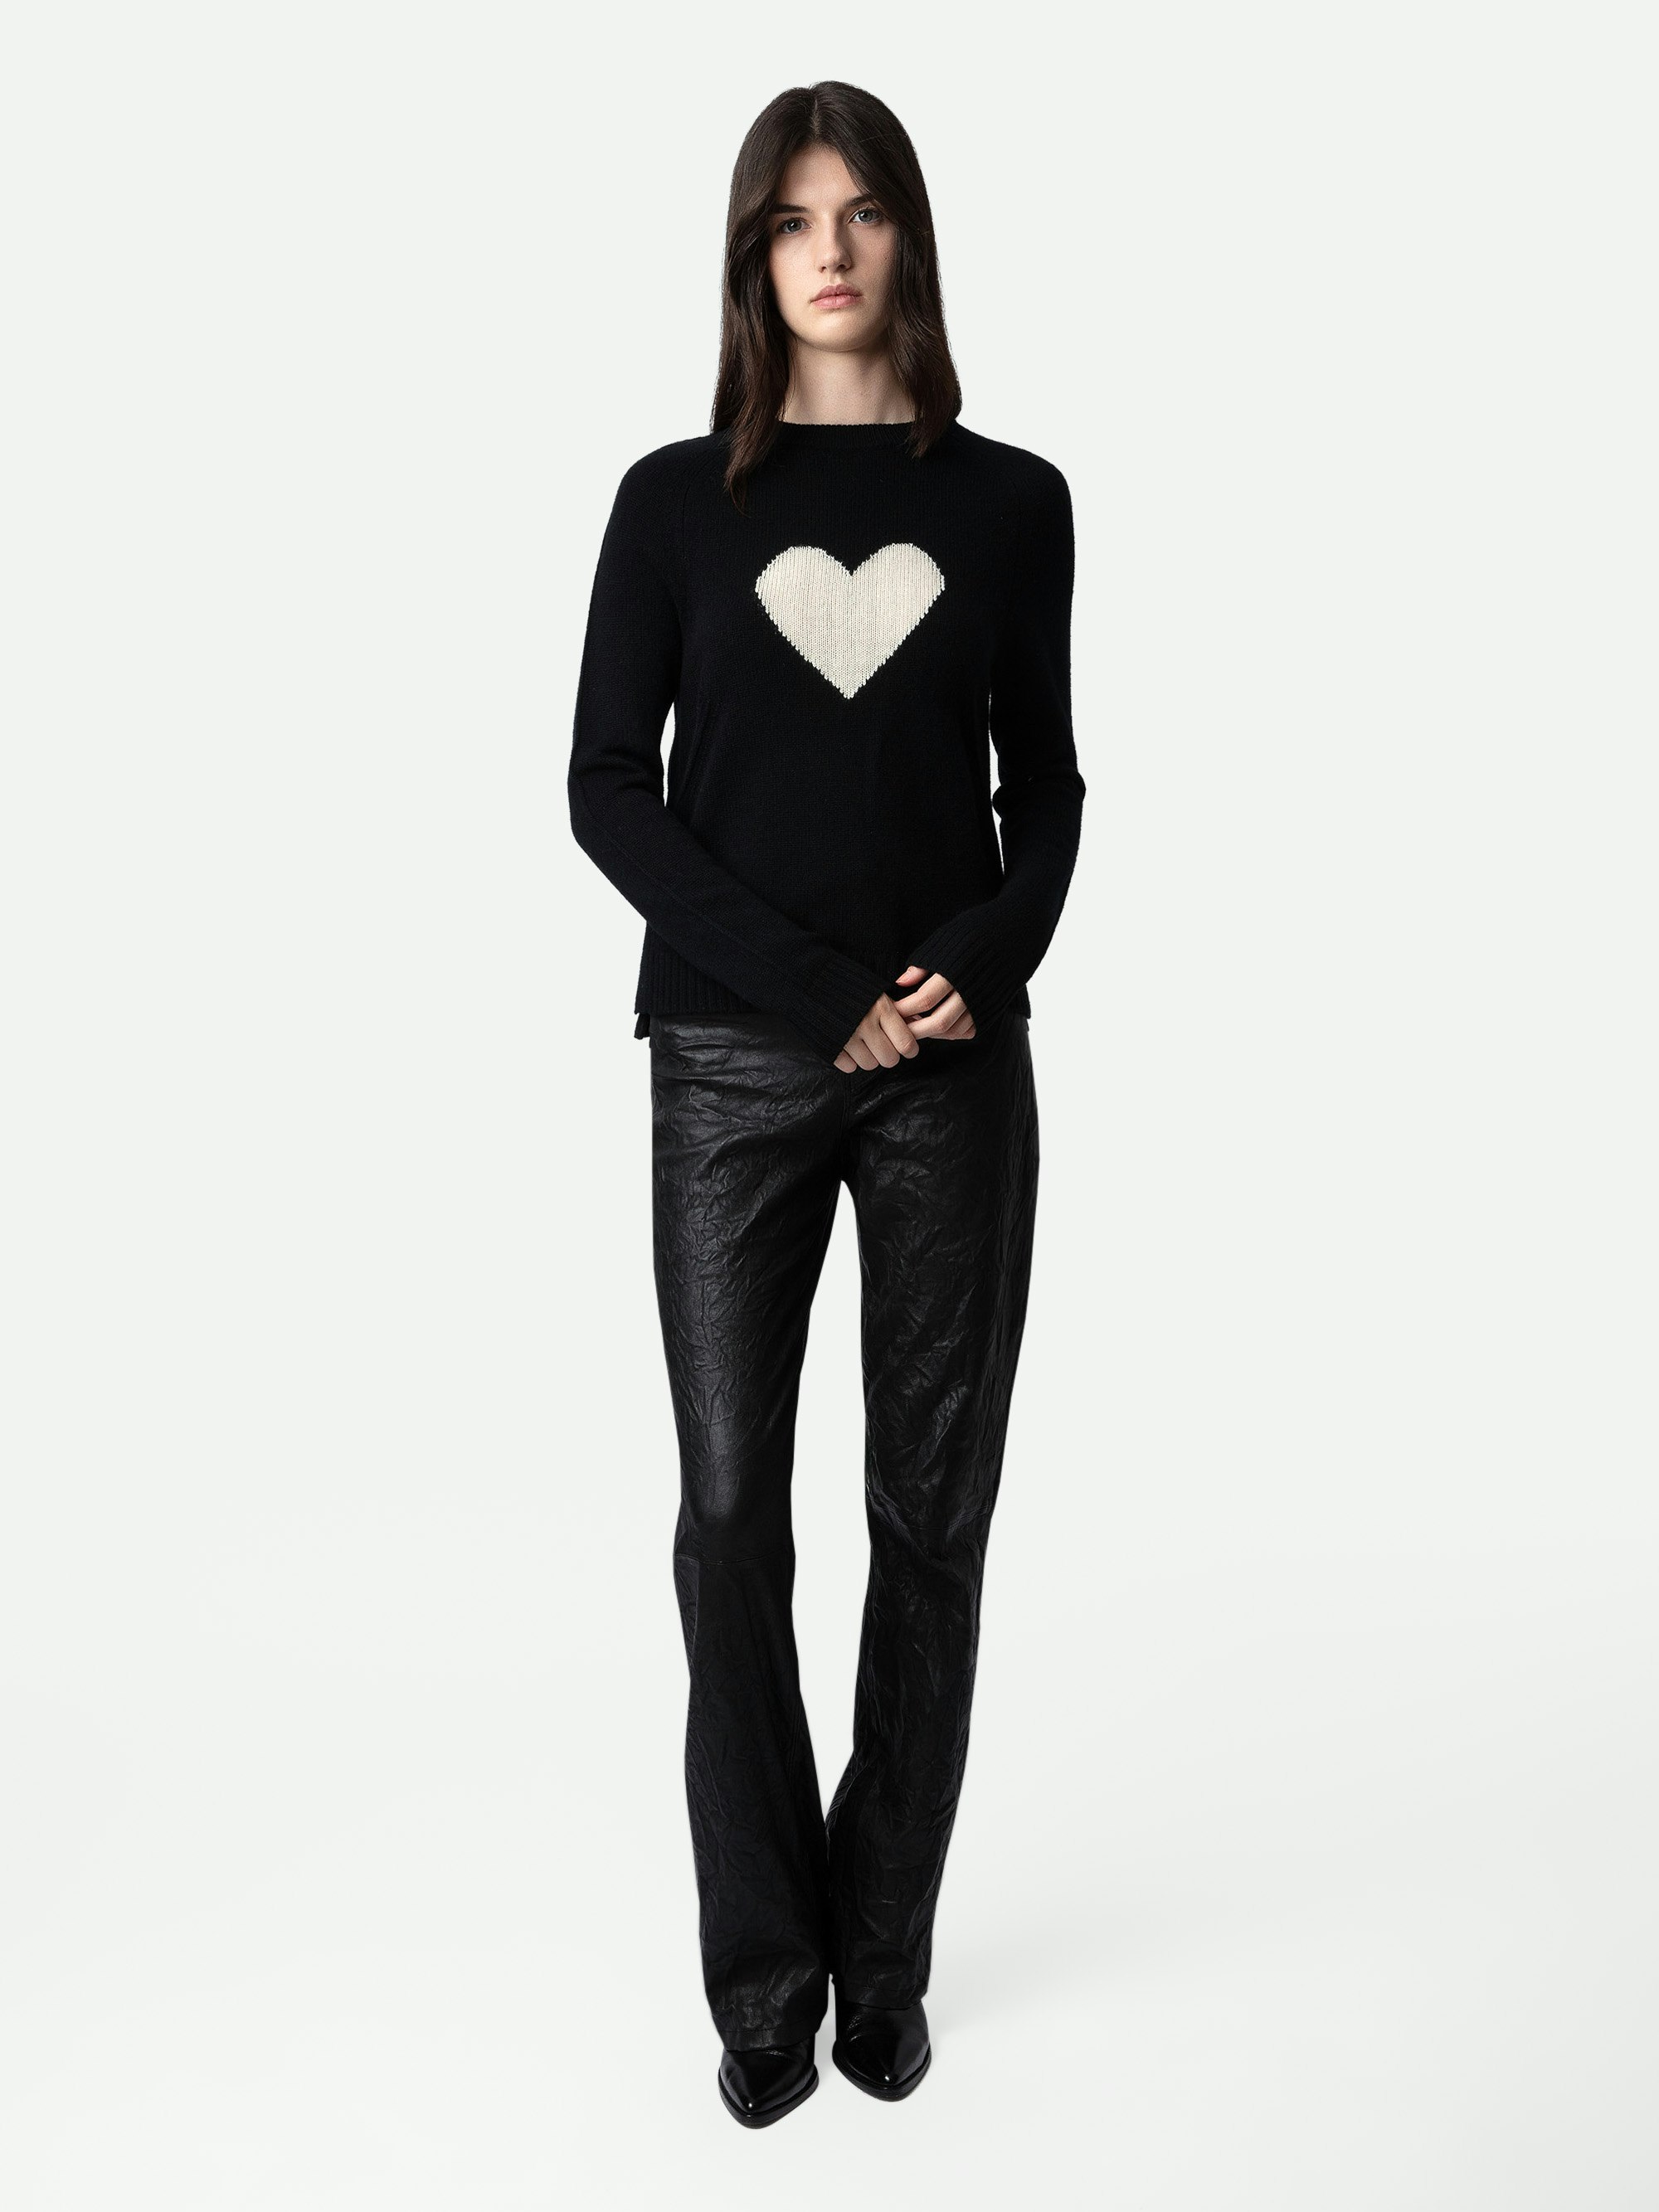 Lili Cashmere Sweater - Women’s black cashmere sweater with heart embellishment on the front.